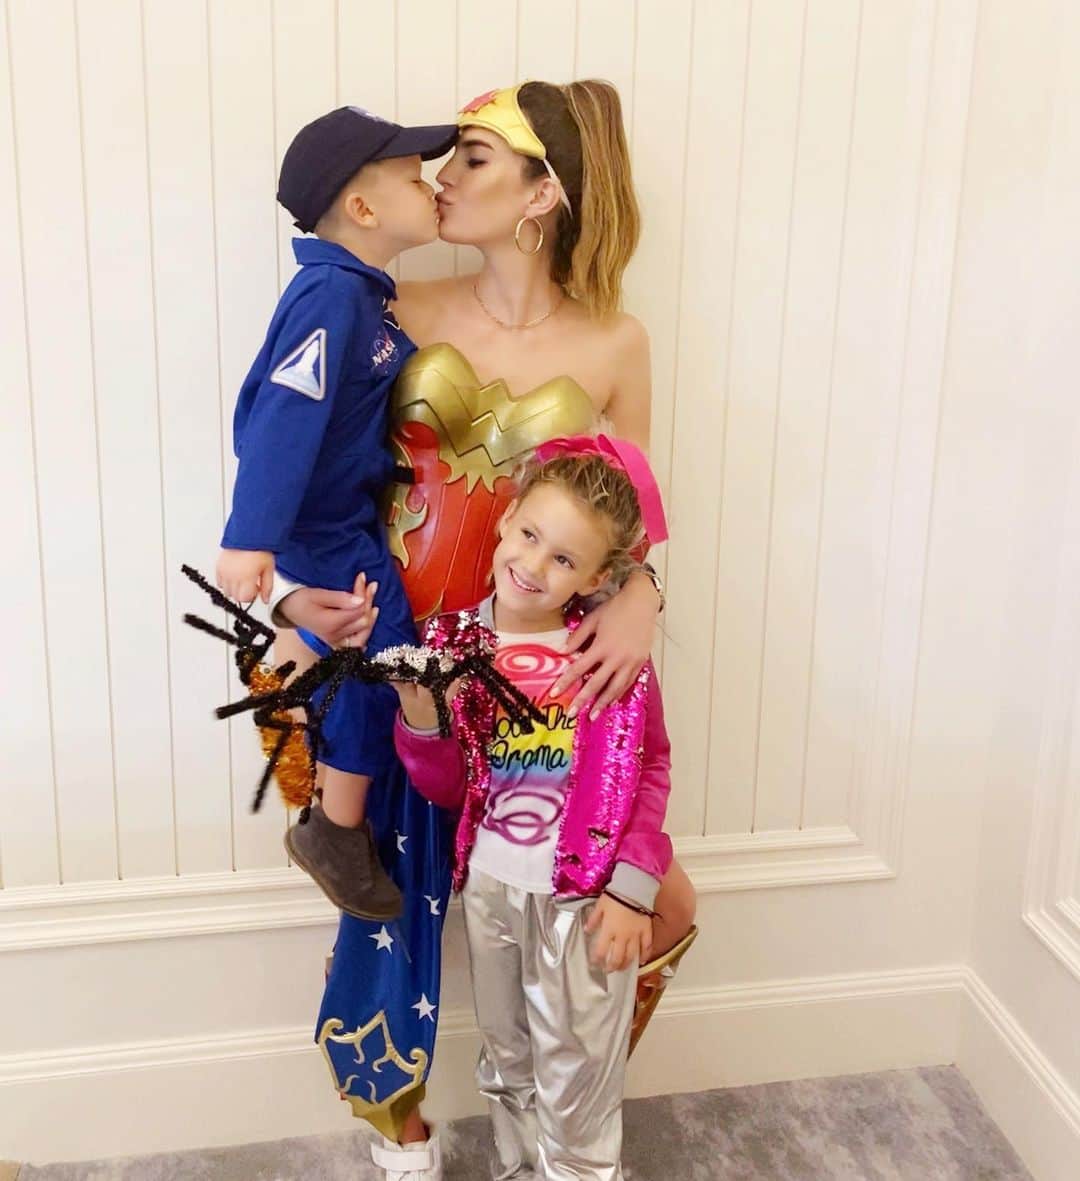 Elizabeth Chambers Hammerのインスタグラム：「An astronaut, Jojo Siwa and Wonder Woman. Not a theme, but all American dream. Happiest  Halloween from GC! 🔮🕸🎃」